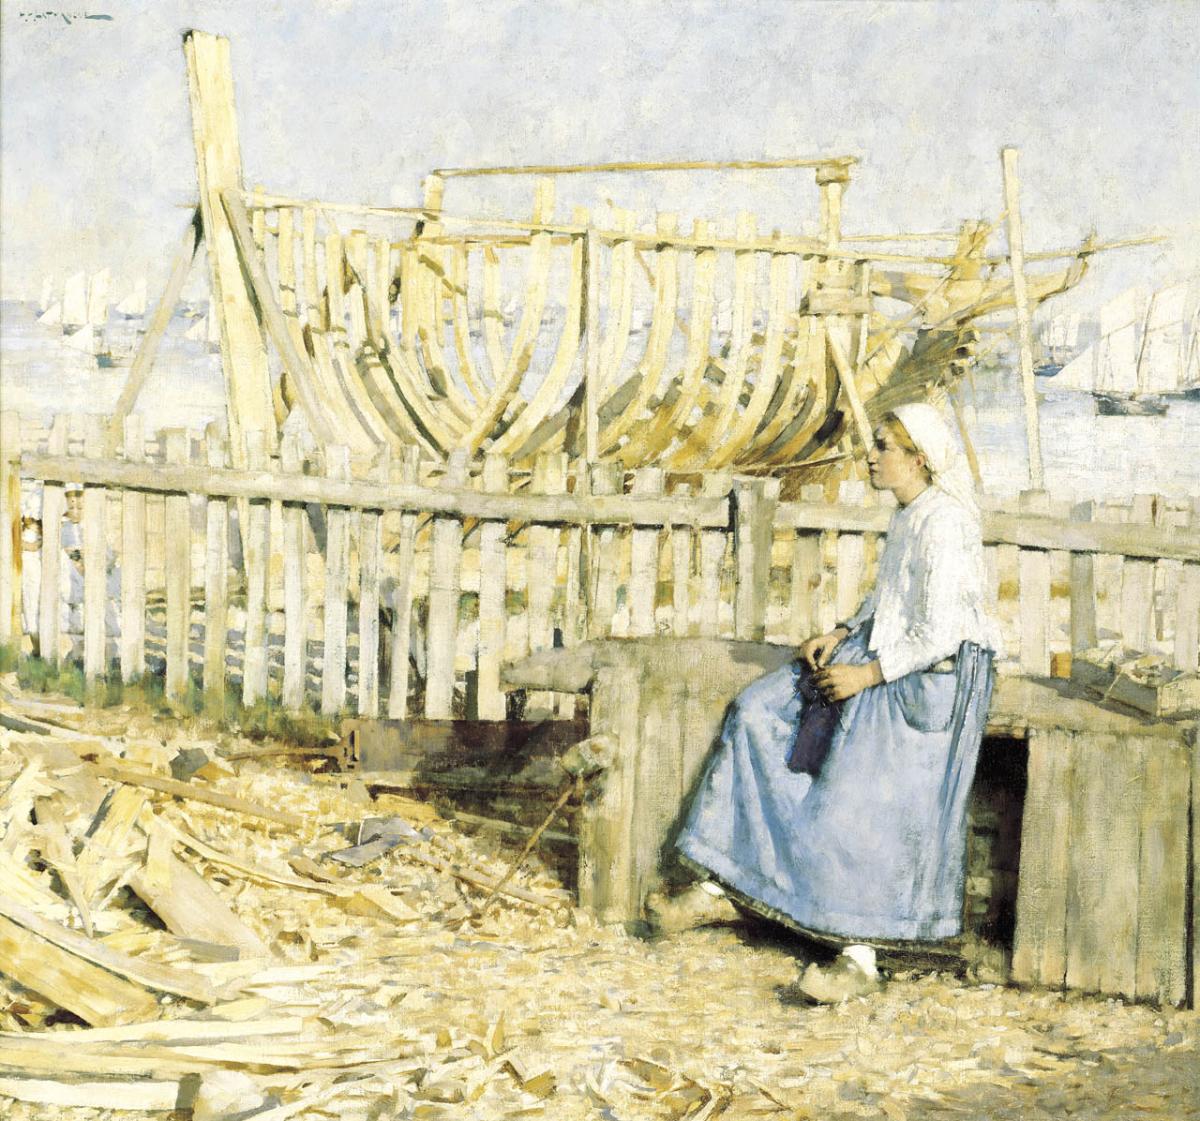 A young girl sits beside a fishing boat under construction